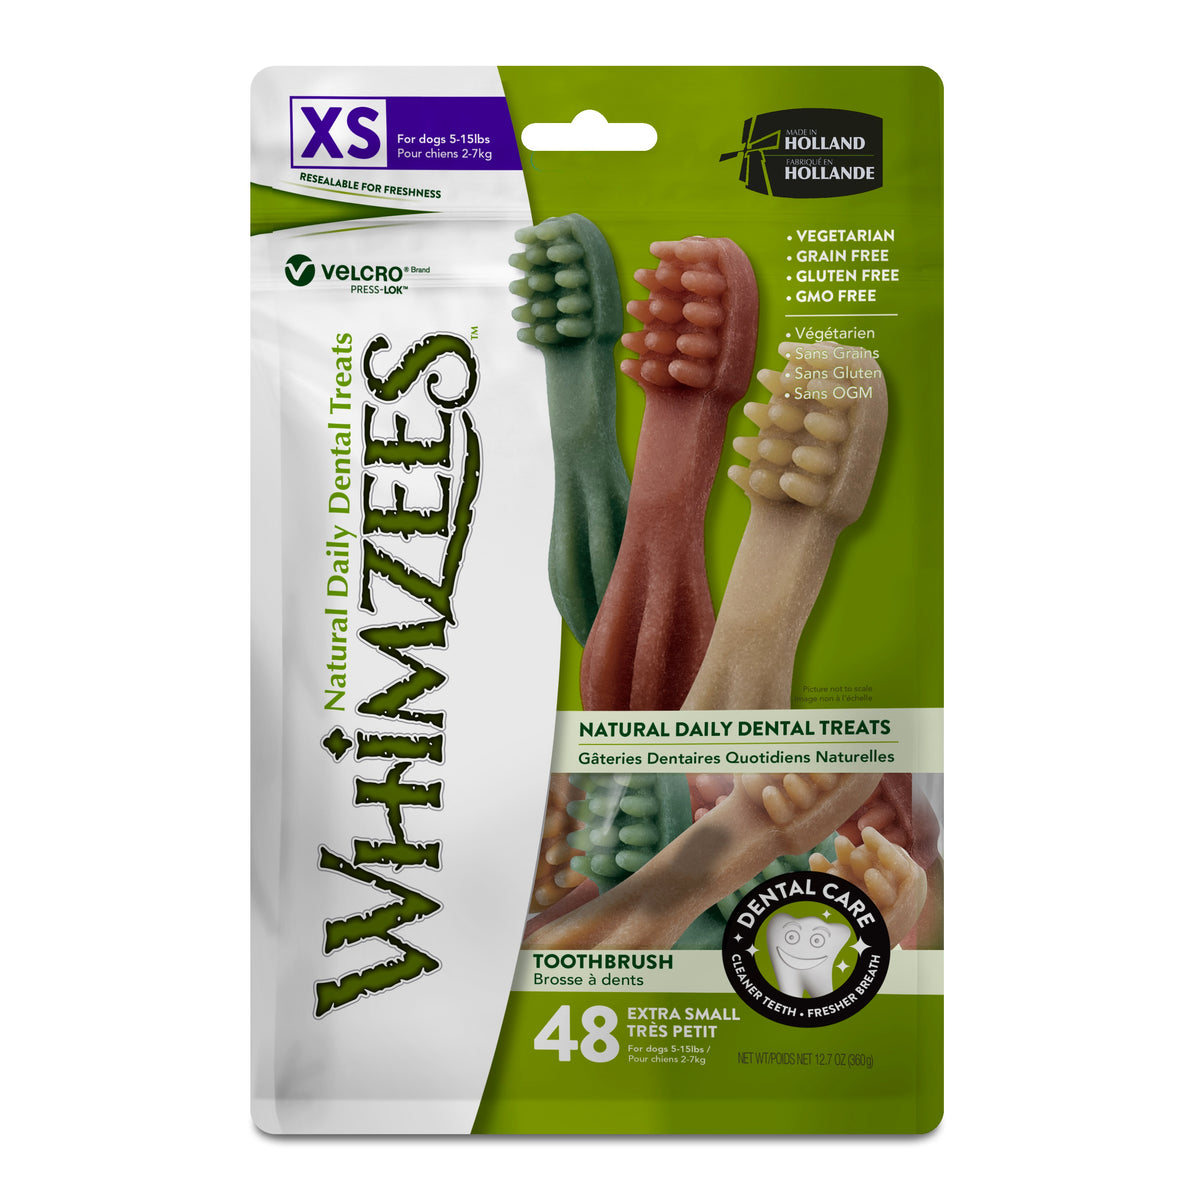 Whimzees Toothbrush All Natural Daily Dental Treats for Dogs - Value Pack